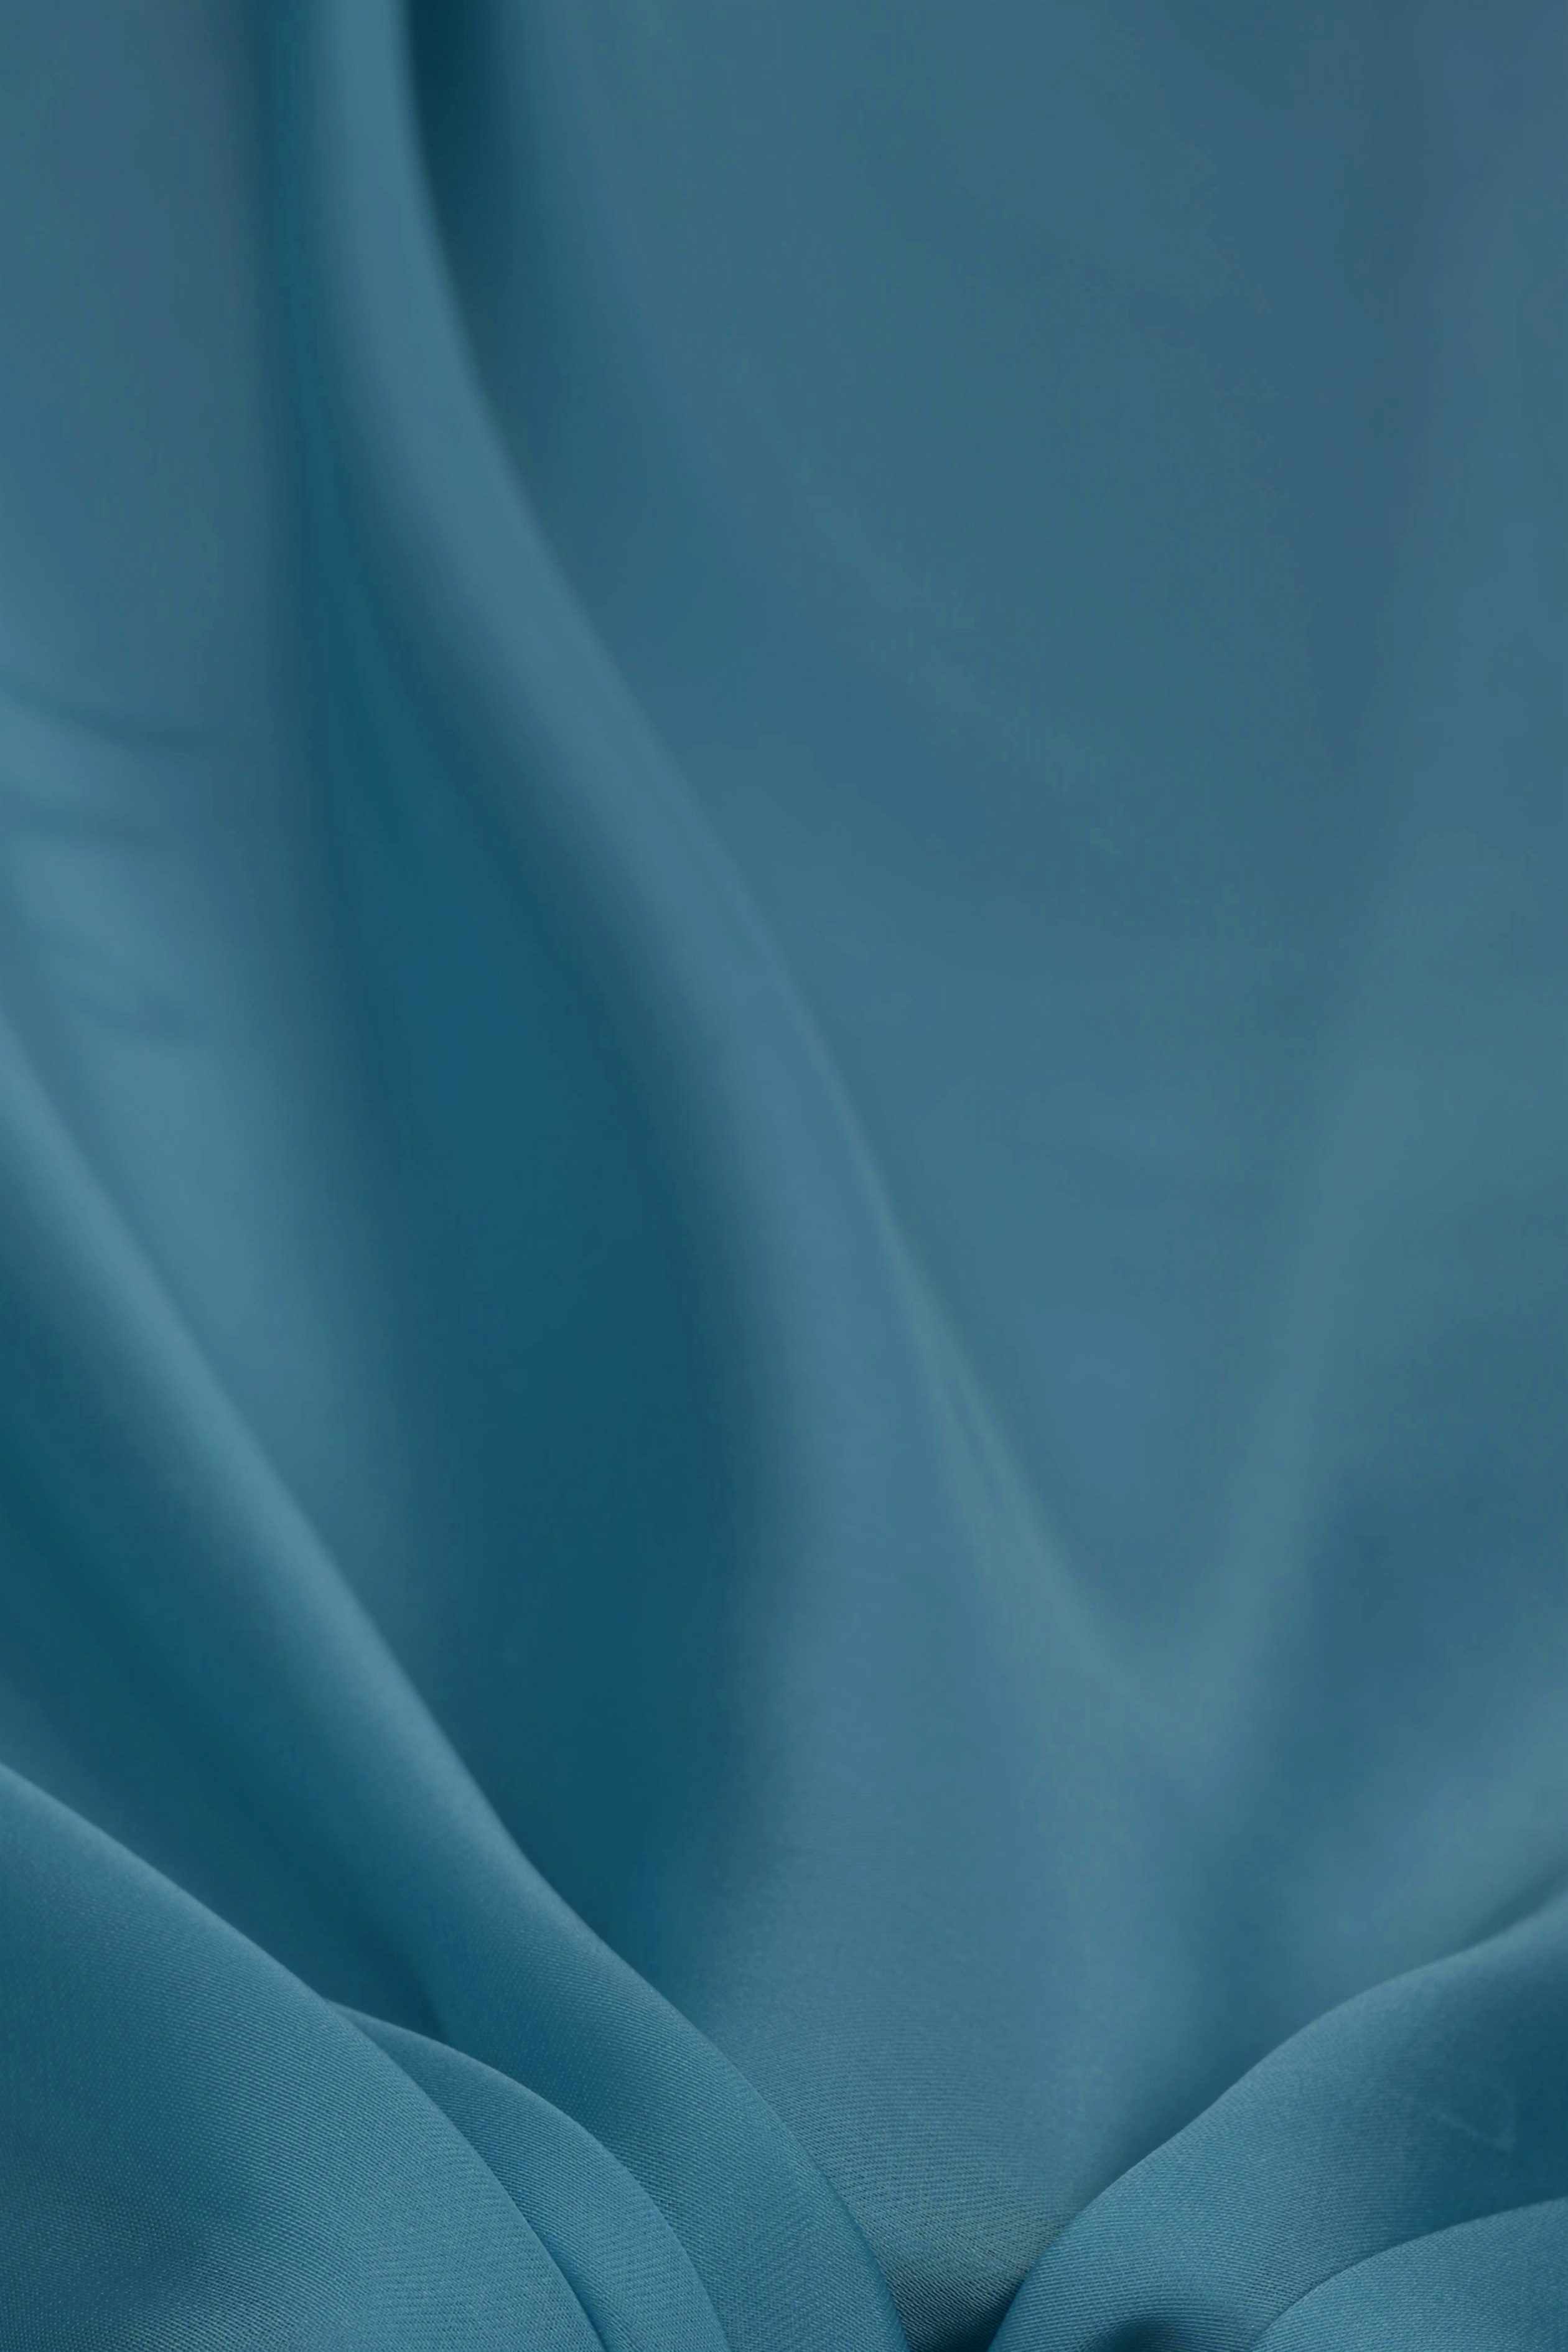 Cationic Teal Plain Dyed Satin Georgette Fabric